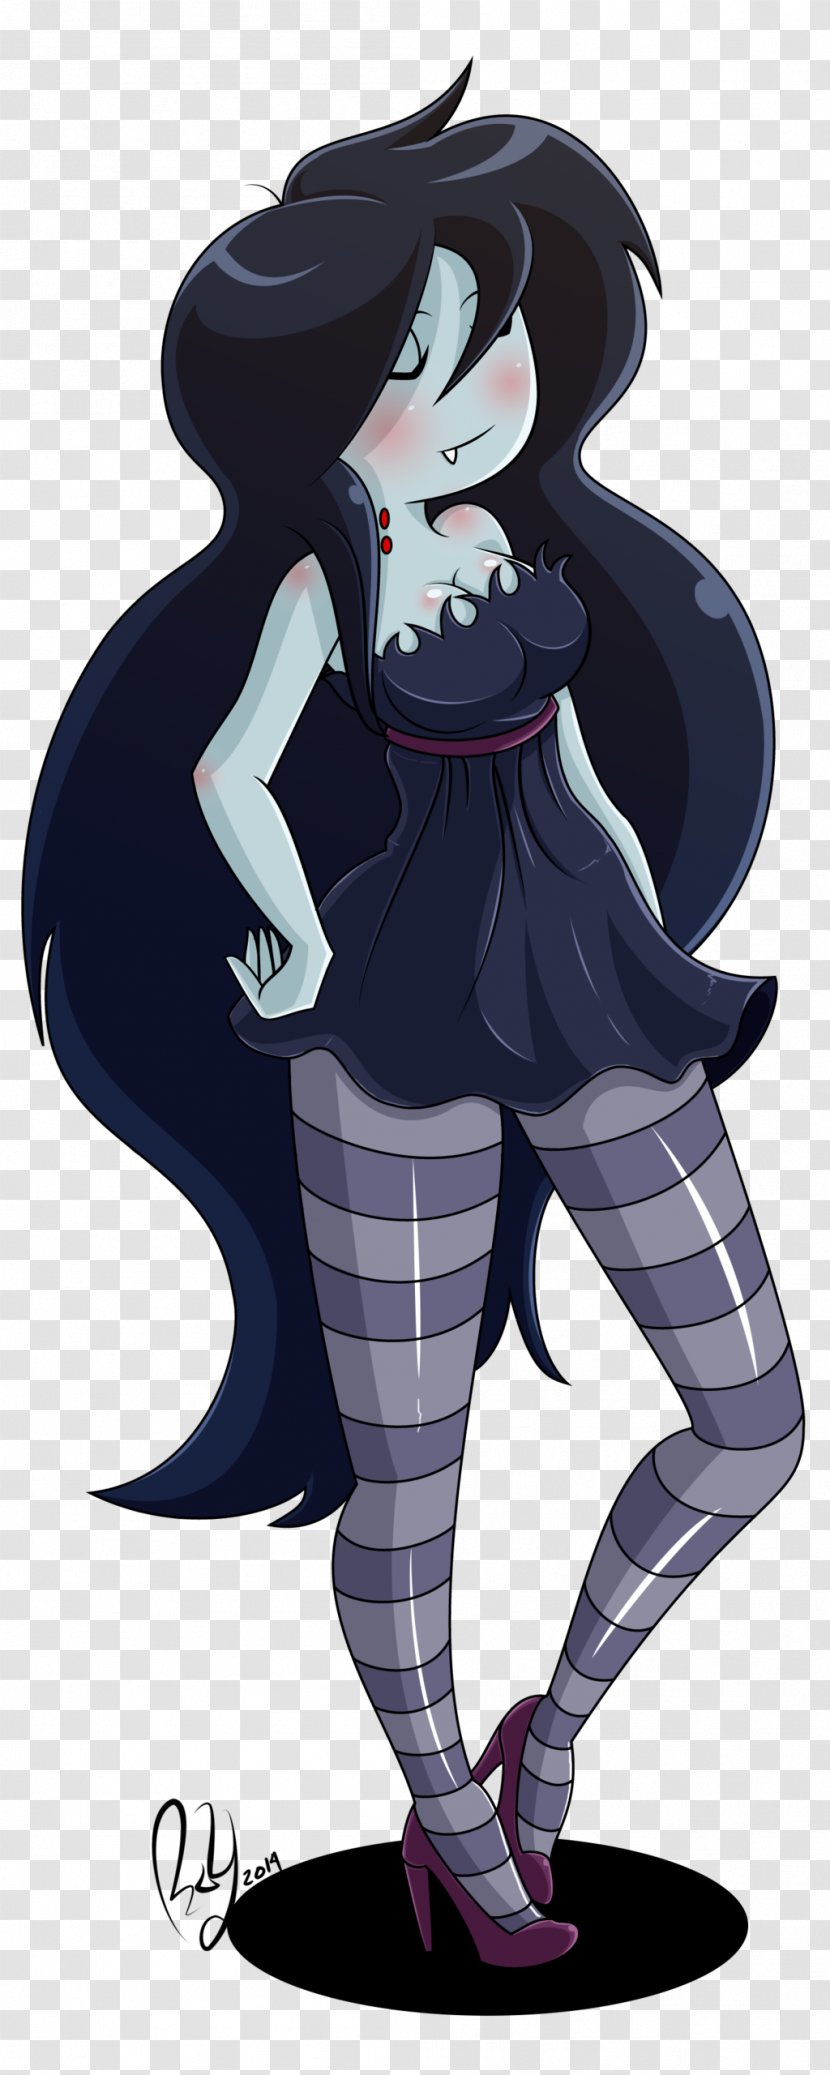 Marceline The Vampire Queen Adventure Time: Explore Dungeon Because I Don't Know! Henchman Cartoon Network DeviantArt - Watercolor - Silhouette Transparent PNG